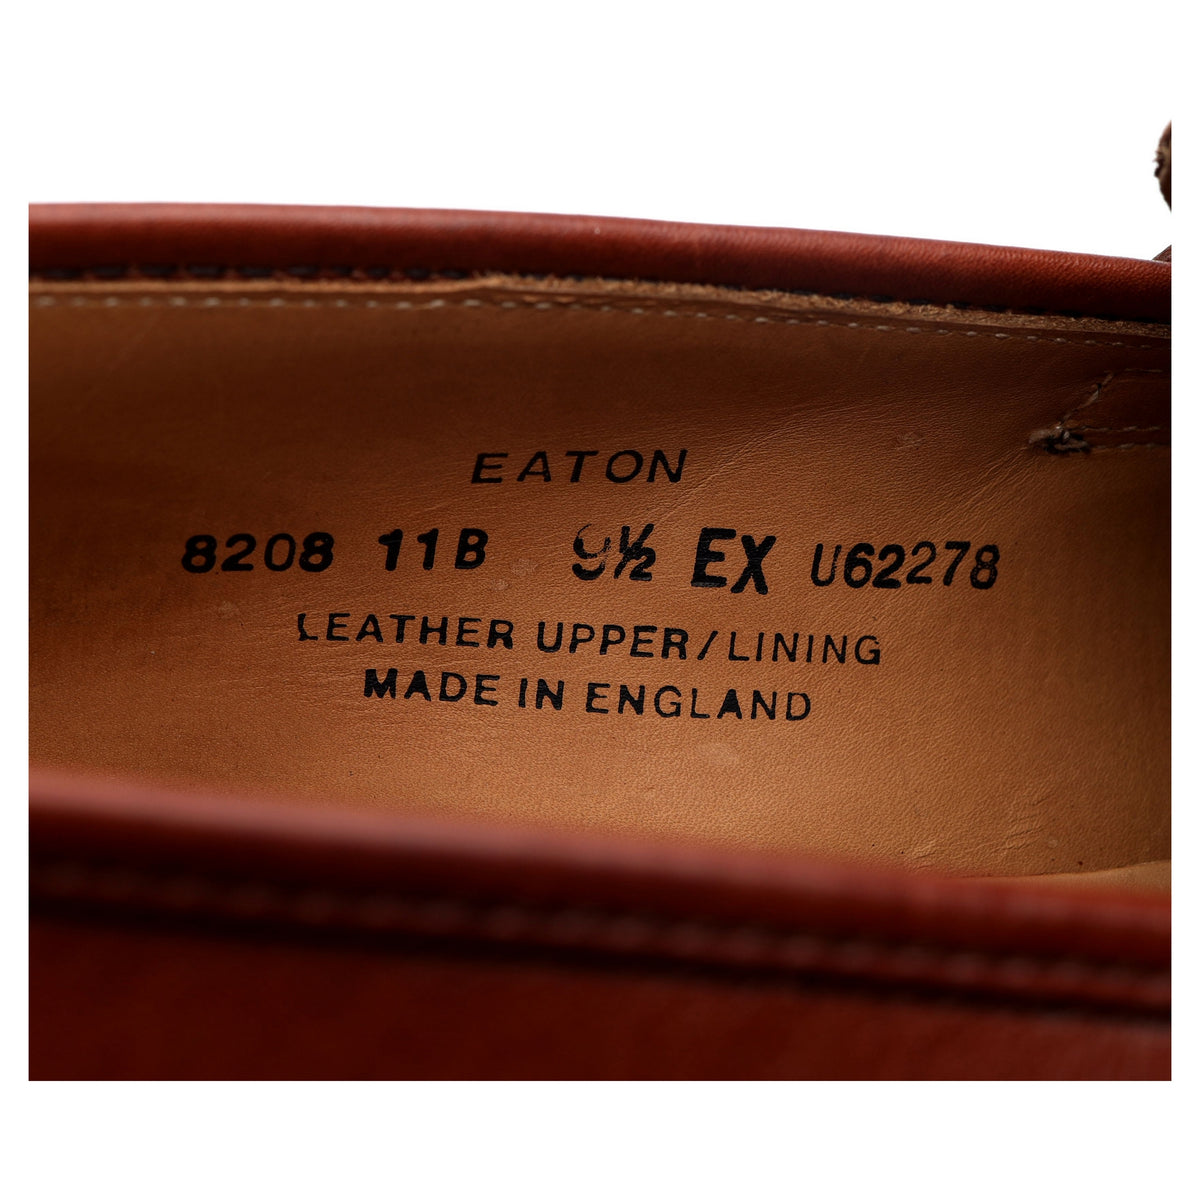 &#39;Eaton&#39; Tan Brown Leather Suede Loafers UK 9.5 EX